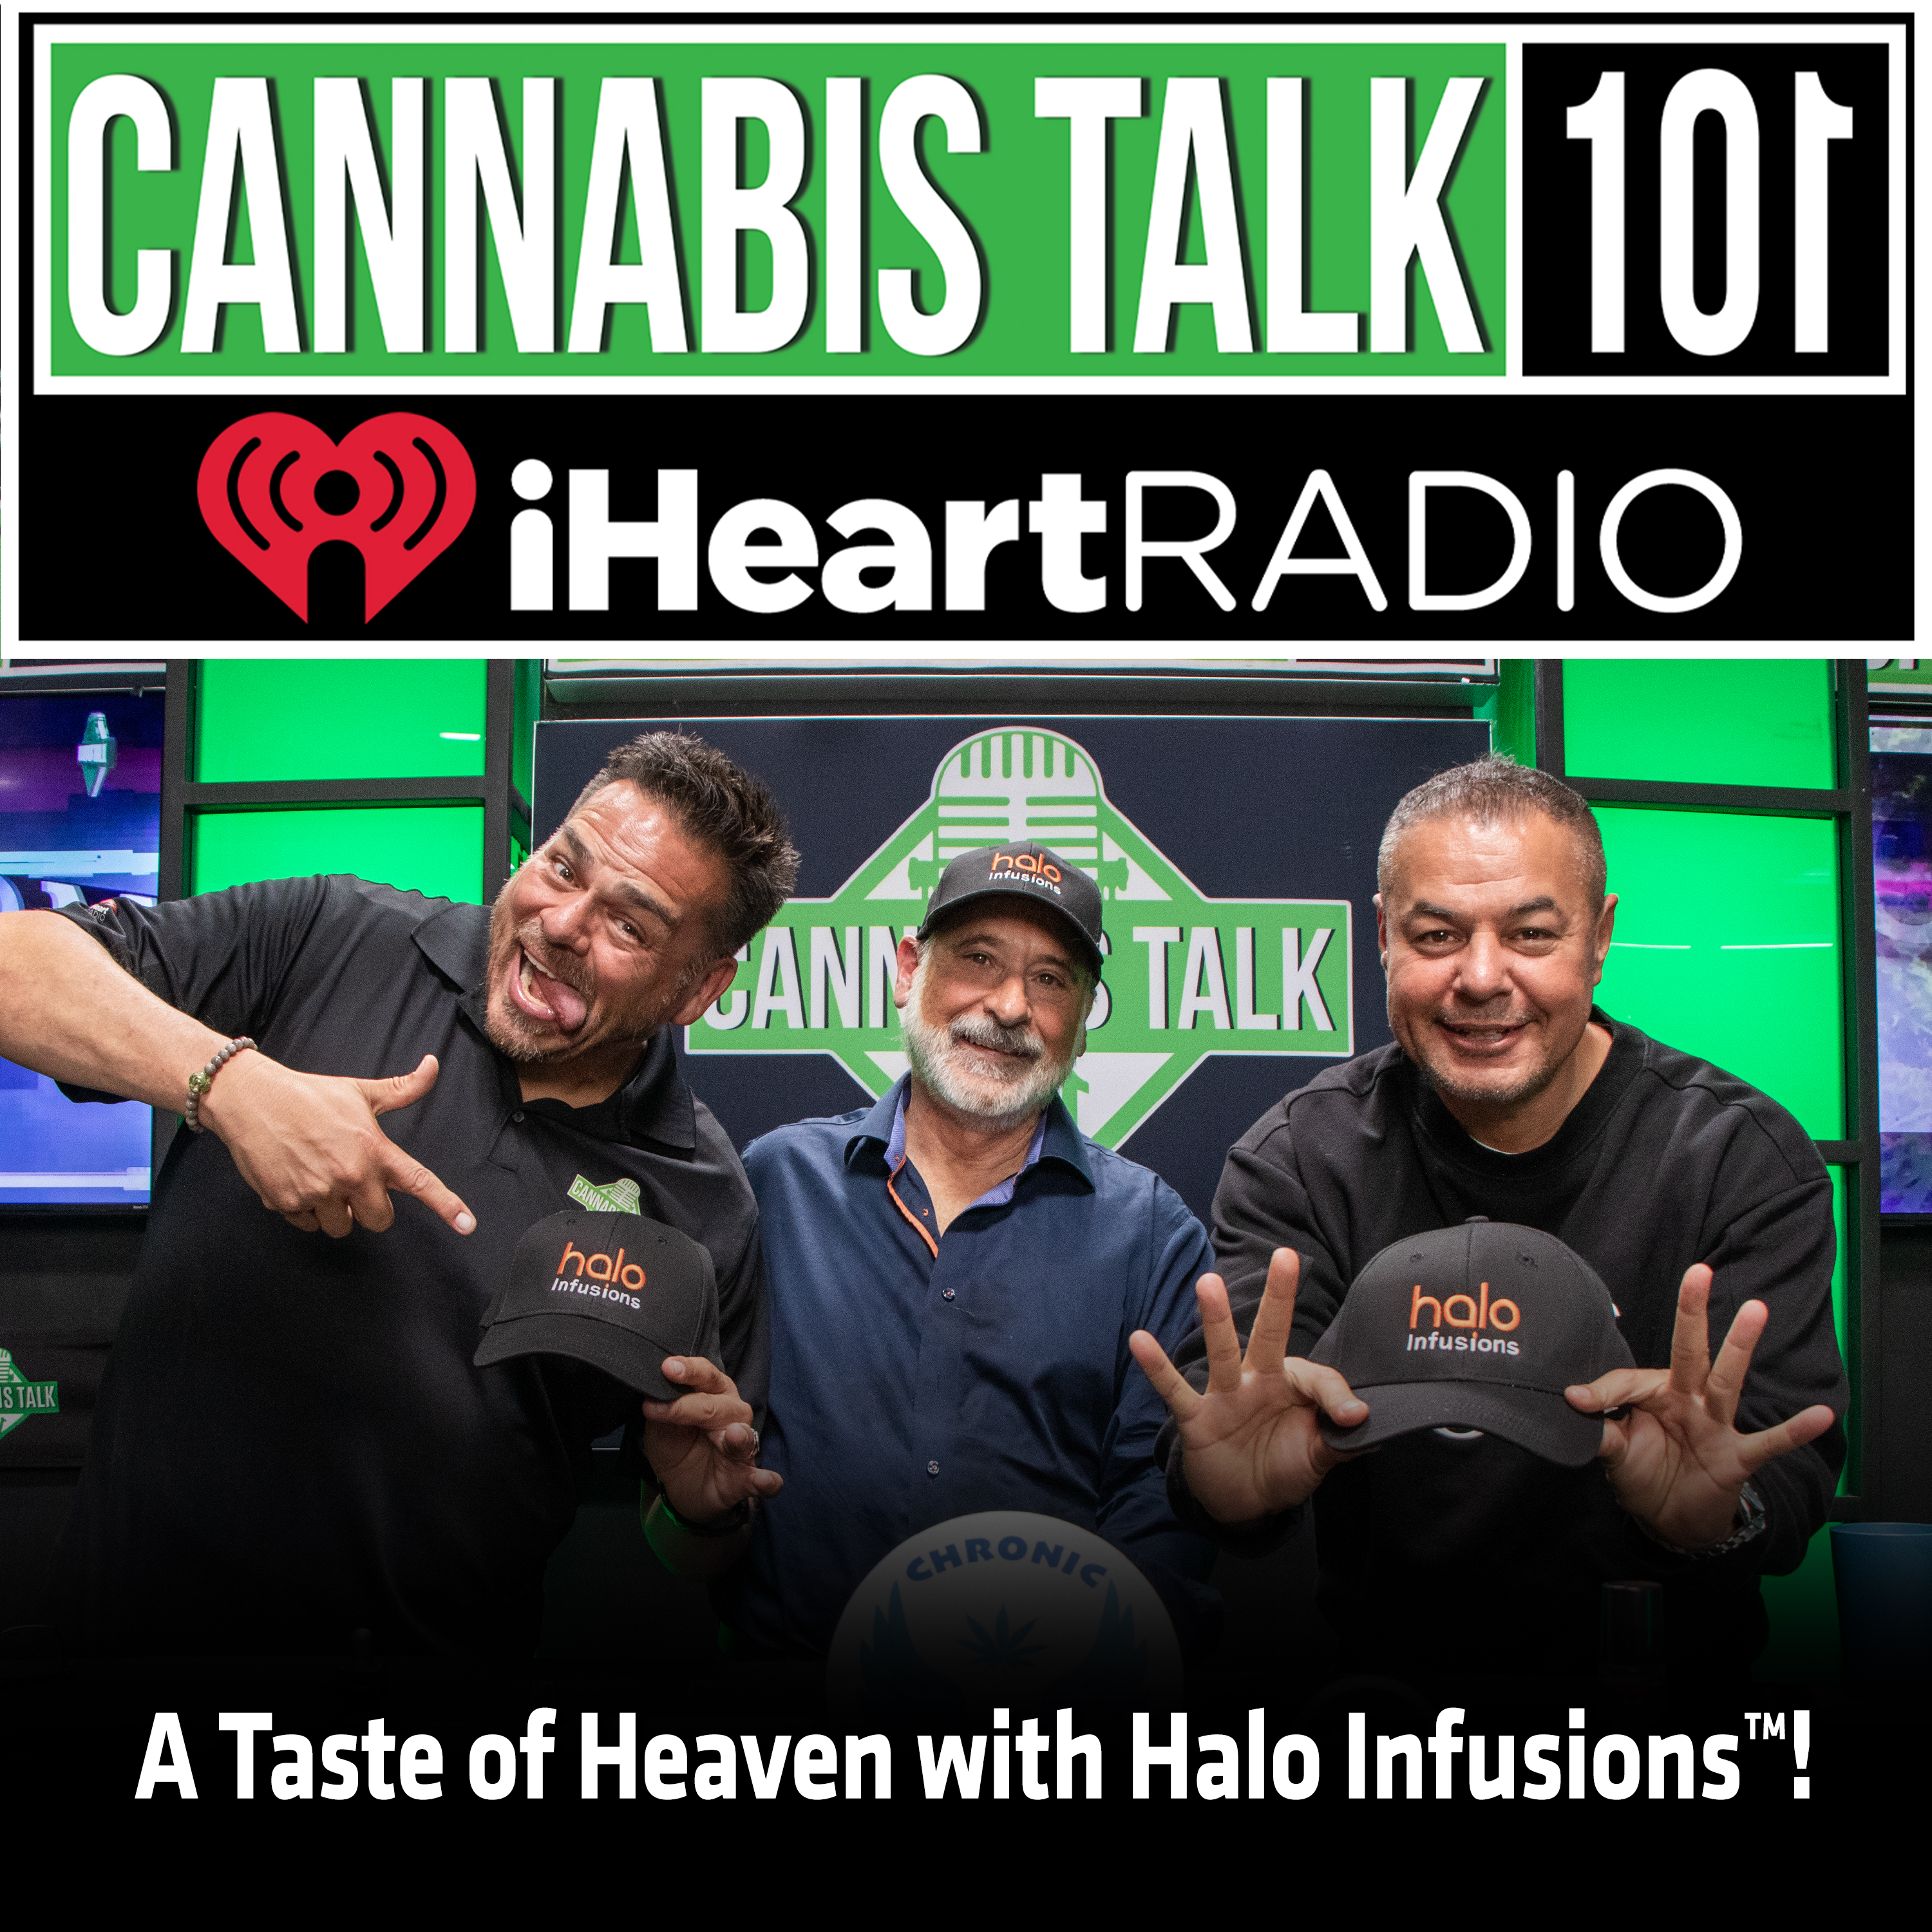 A Taste of Heaven with Halo Infusions™!